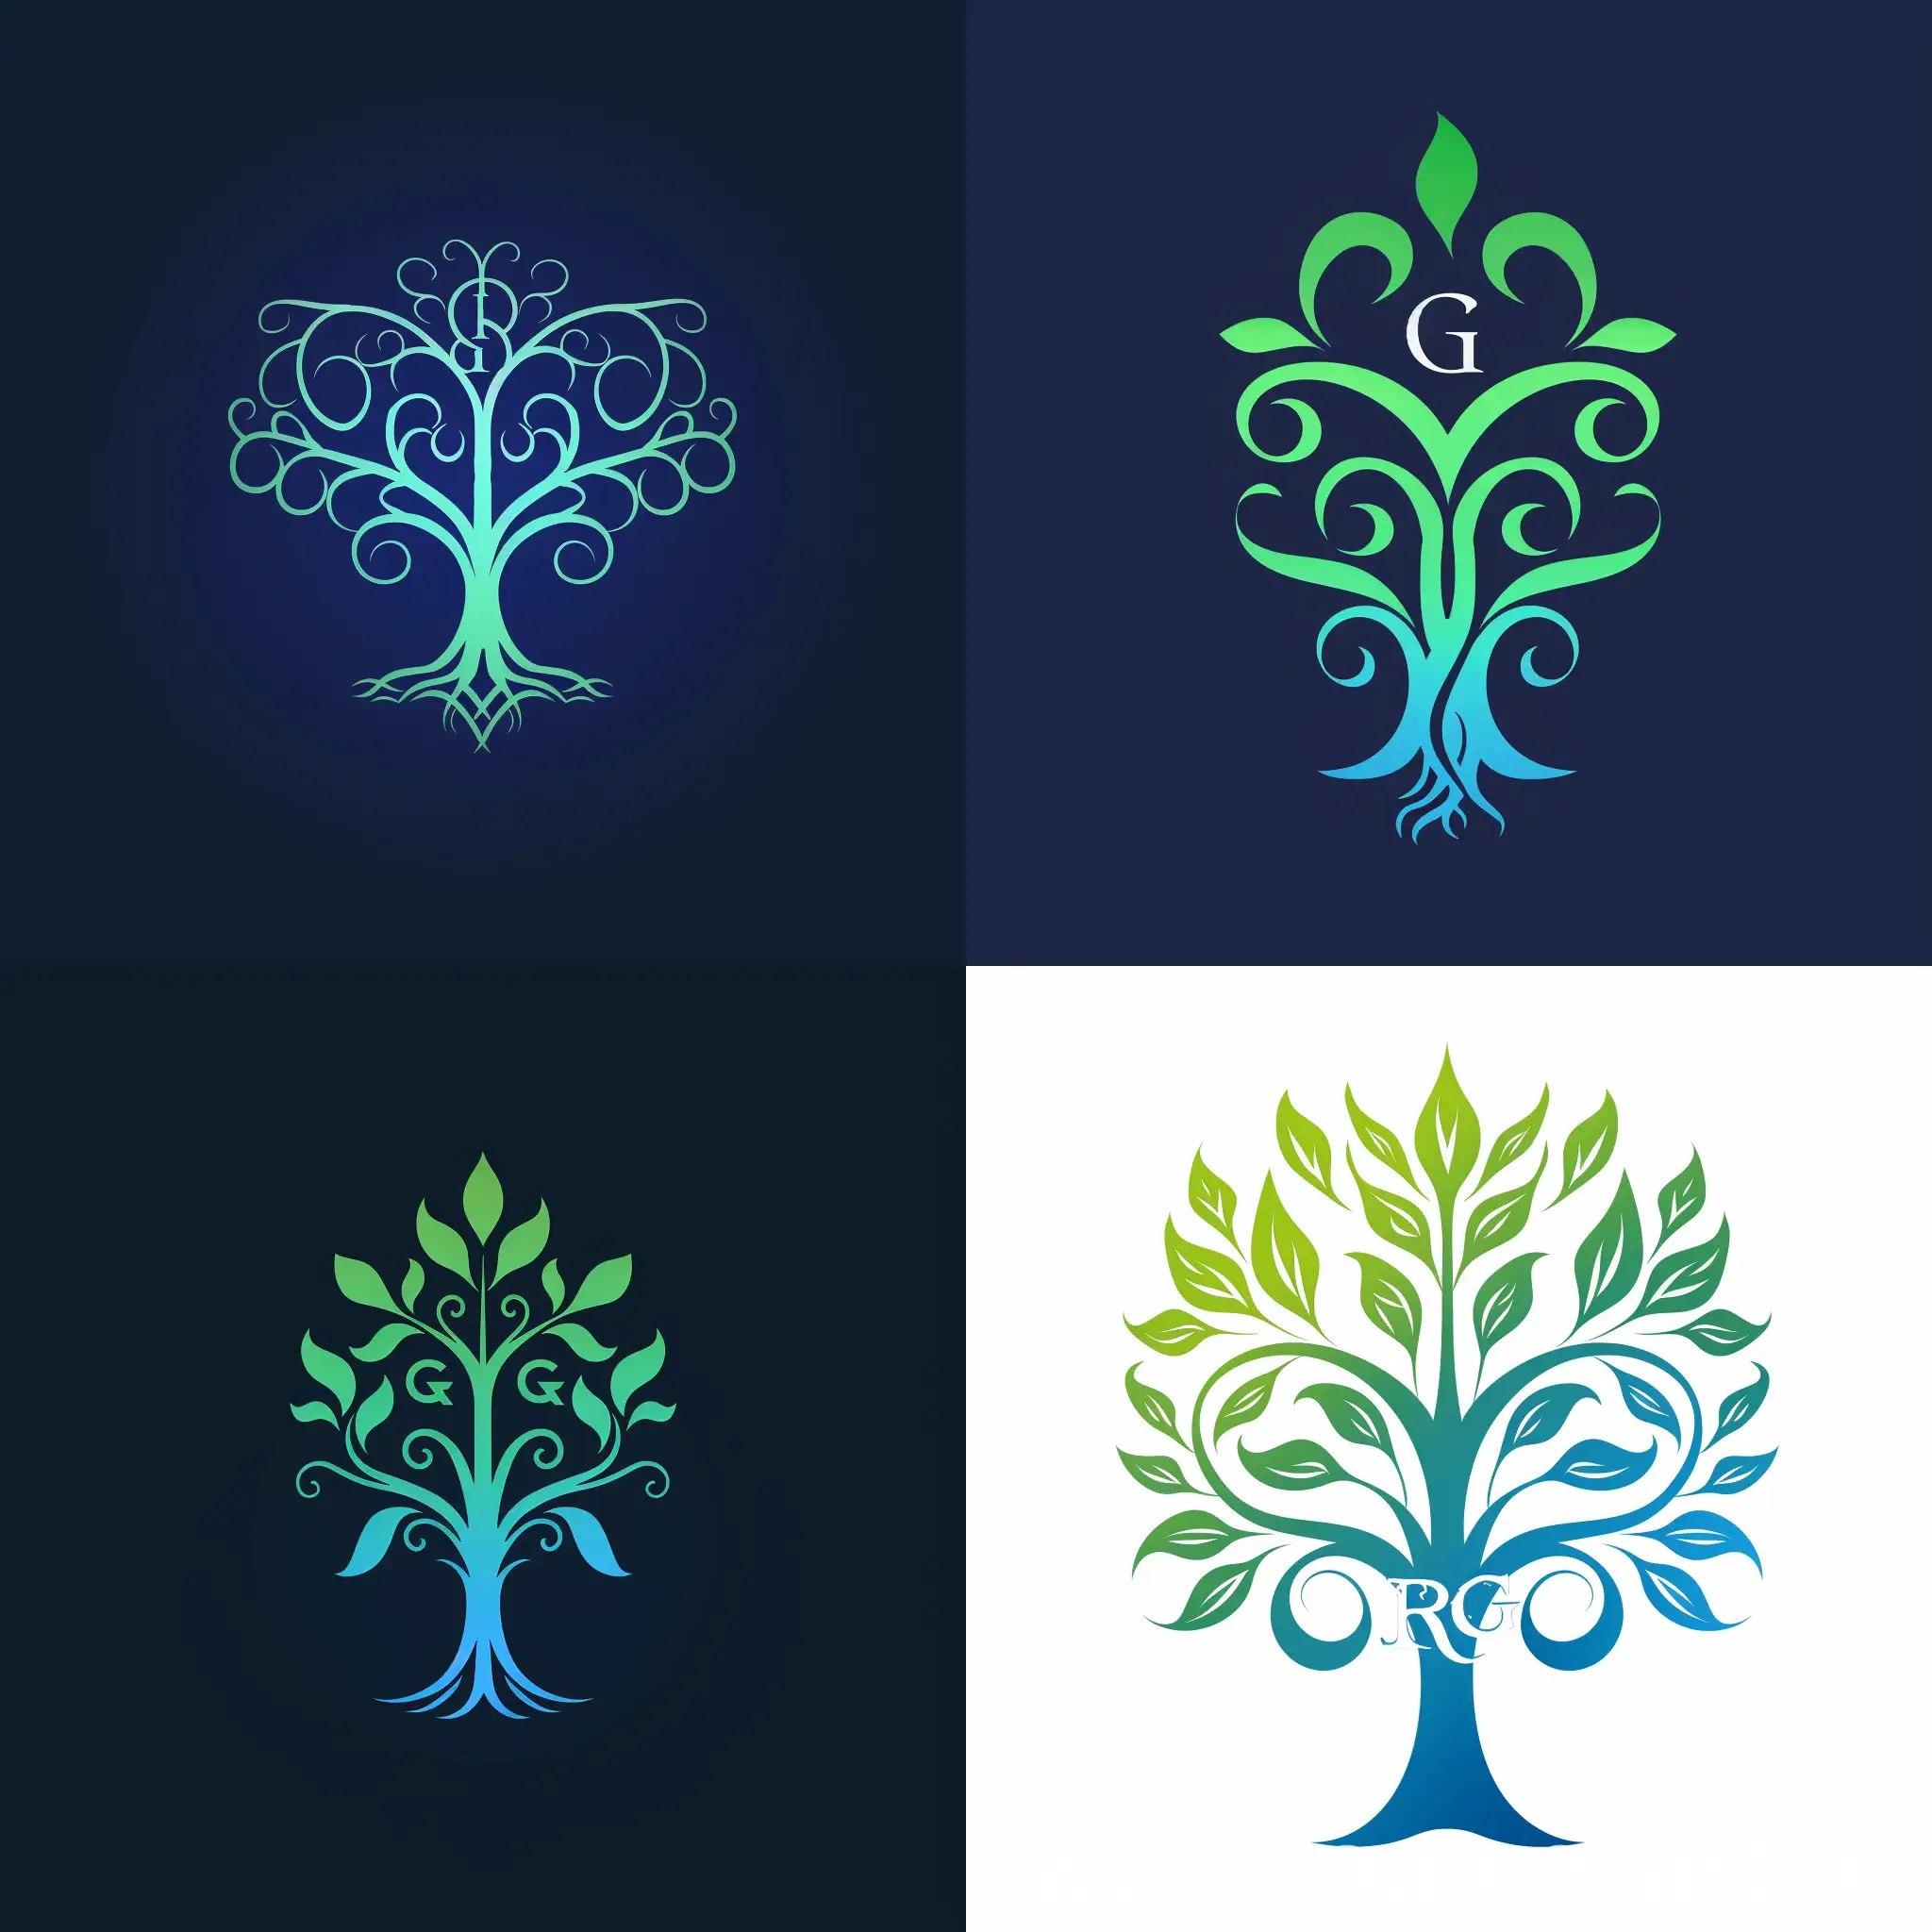 Stylized-Tree-Symbol-with-Rafael-Goffis-Initials-for-Growth-and-Connection